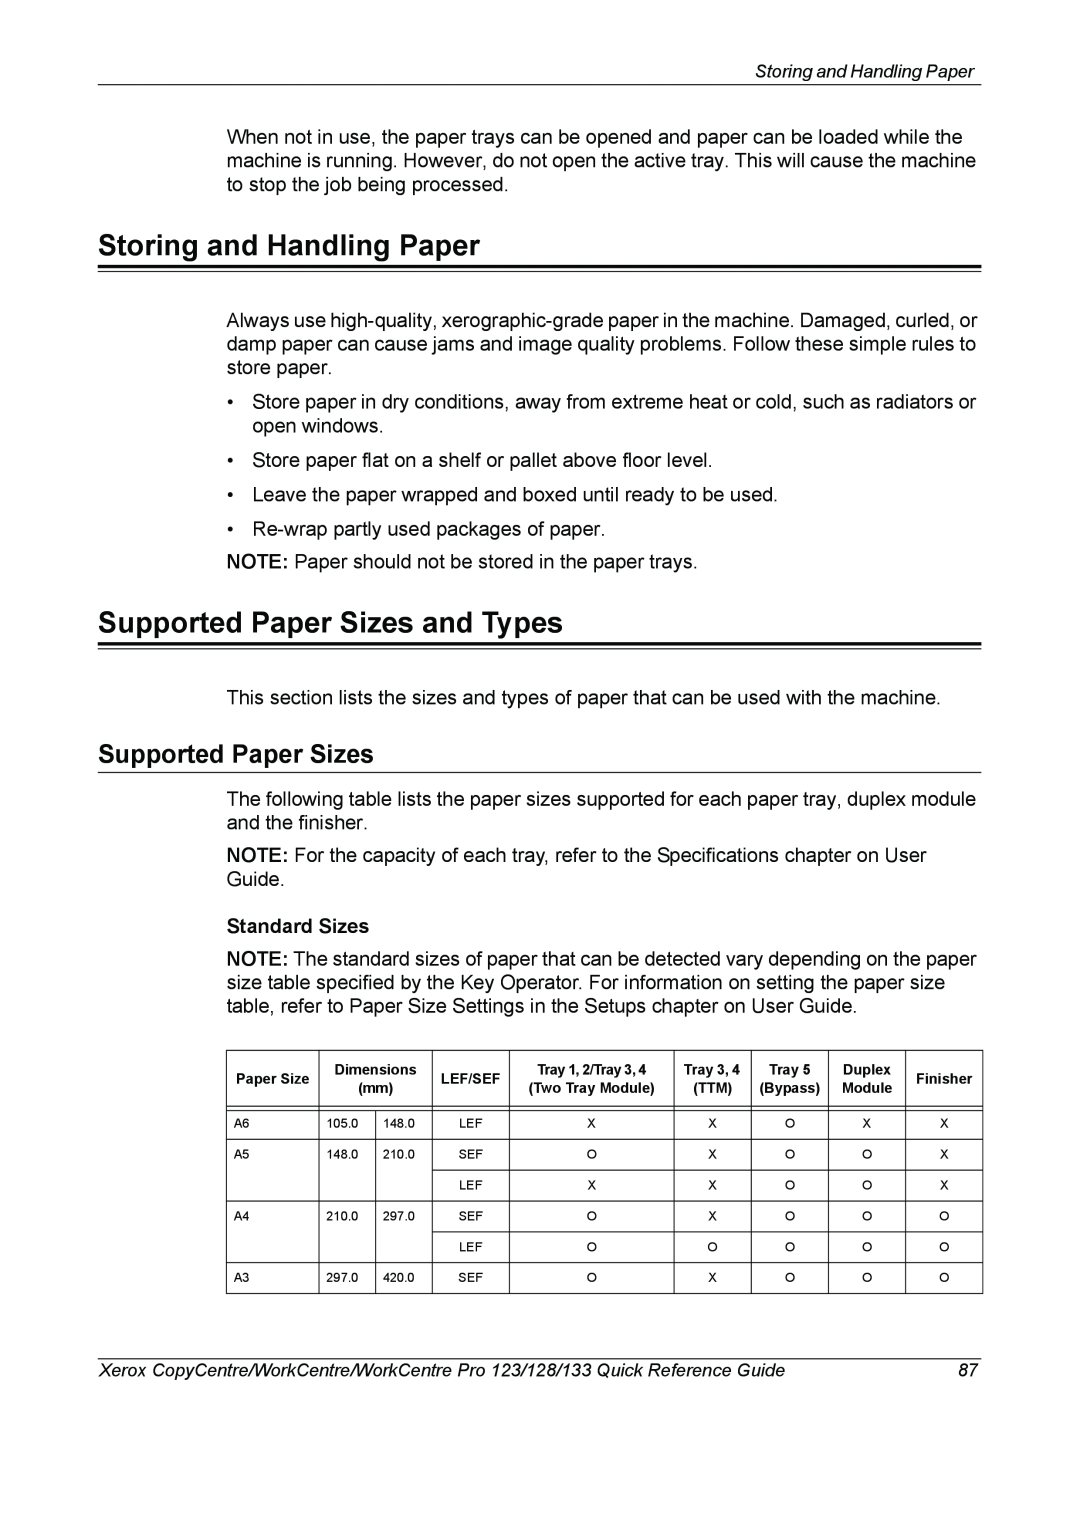 Xerox 604P18037 manual Storing and Handling Paper, Supported Paper Sizes and Types, Standard Sizes 